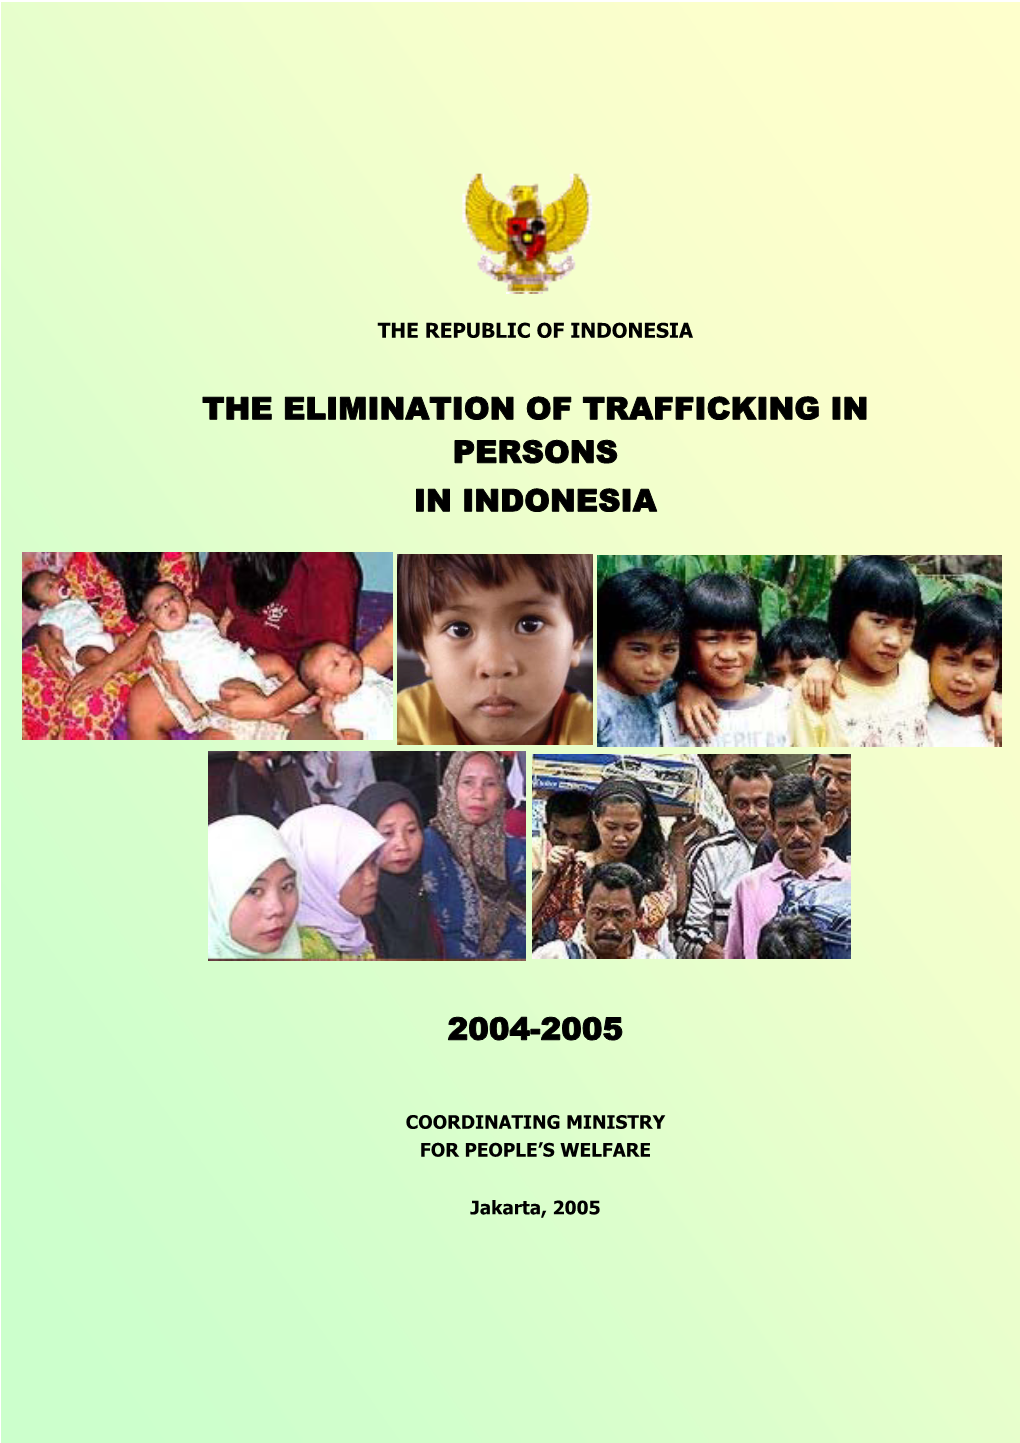 The Elimination of Trafficking in Persons in Indonesia 2004-2005